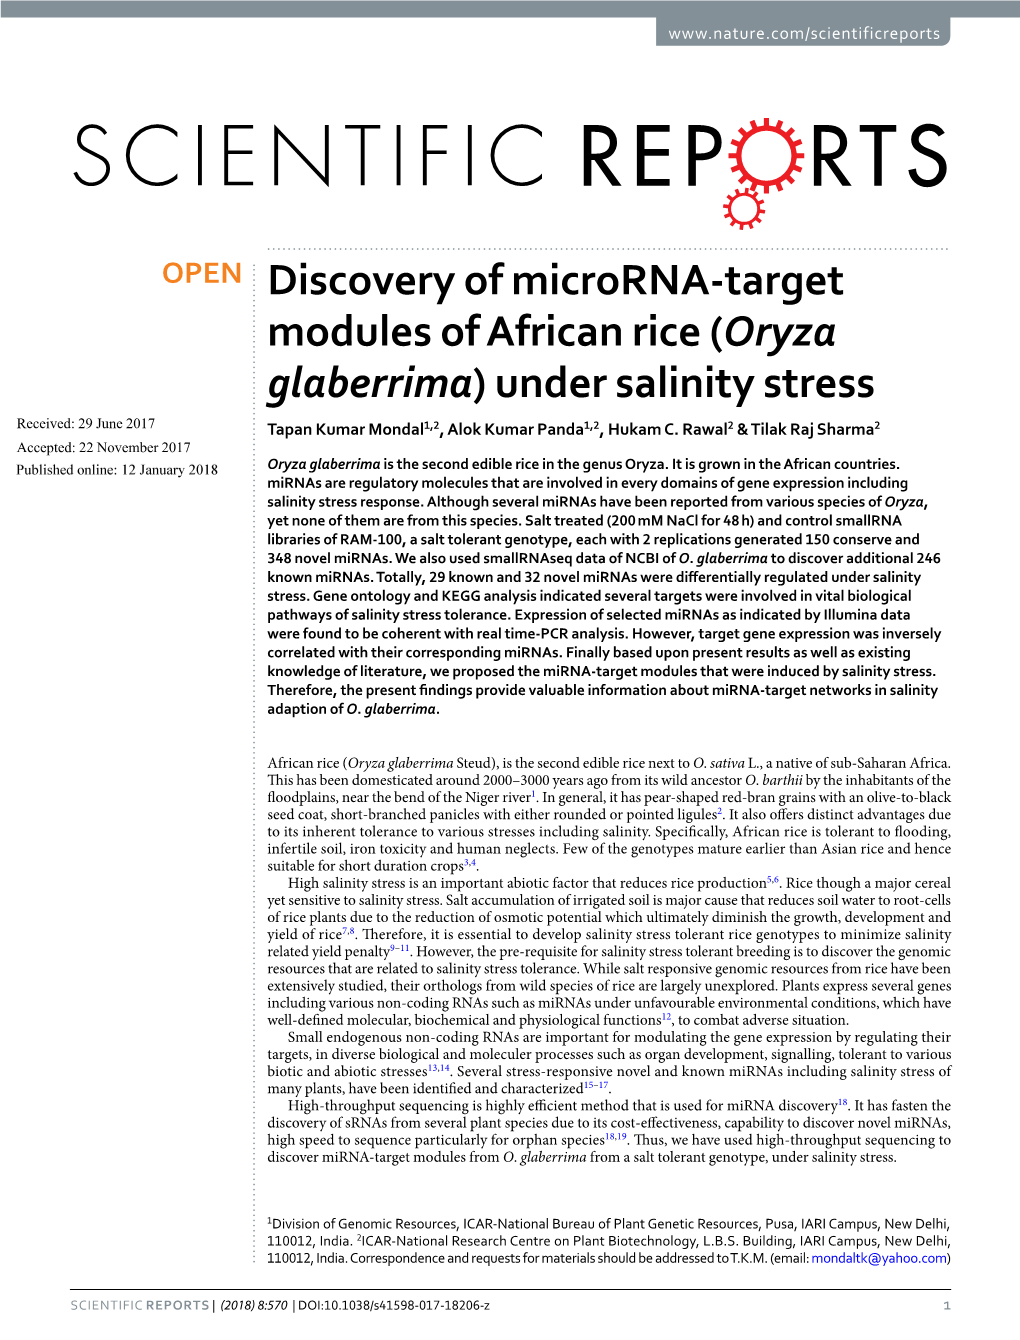 Discovery of Microrna-Target Modules of African Rice (Oryza